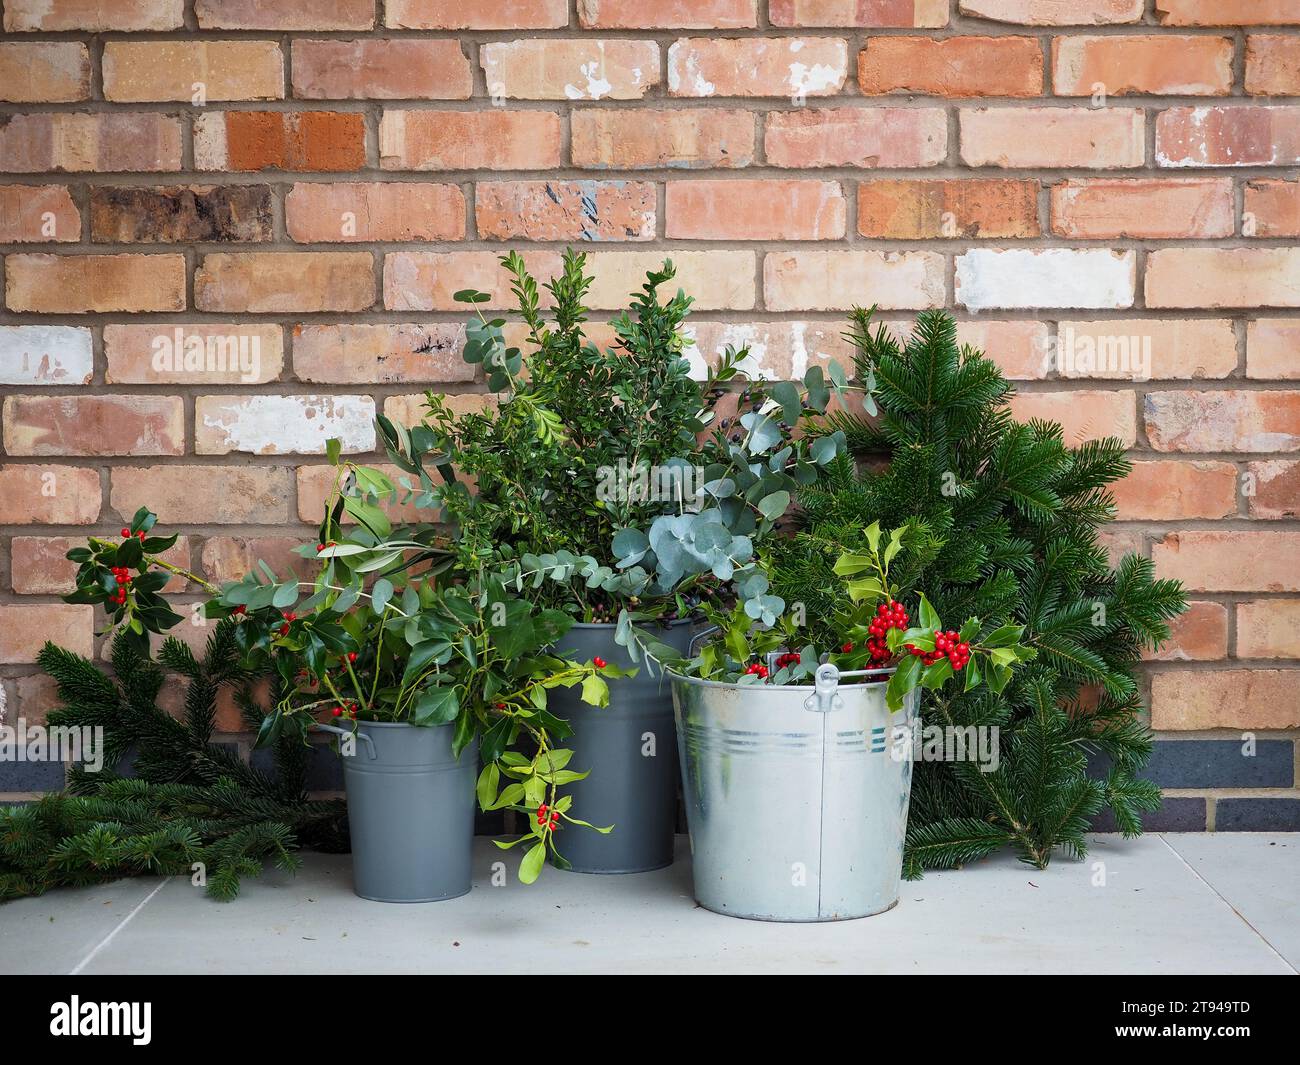 Buckets of foraged Christmas foliage - including holly, eucalyptus and evergreen conifer branches - perfect for wreath making or festive arrangements Stock Photo